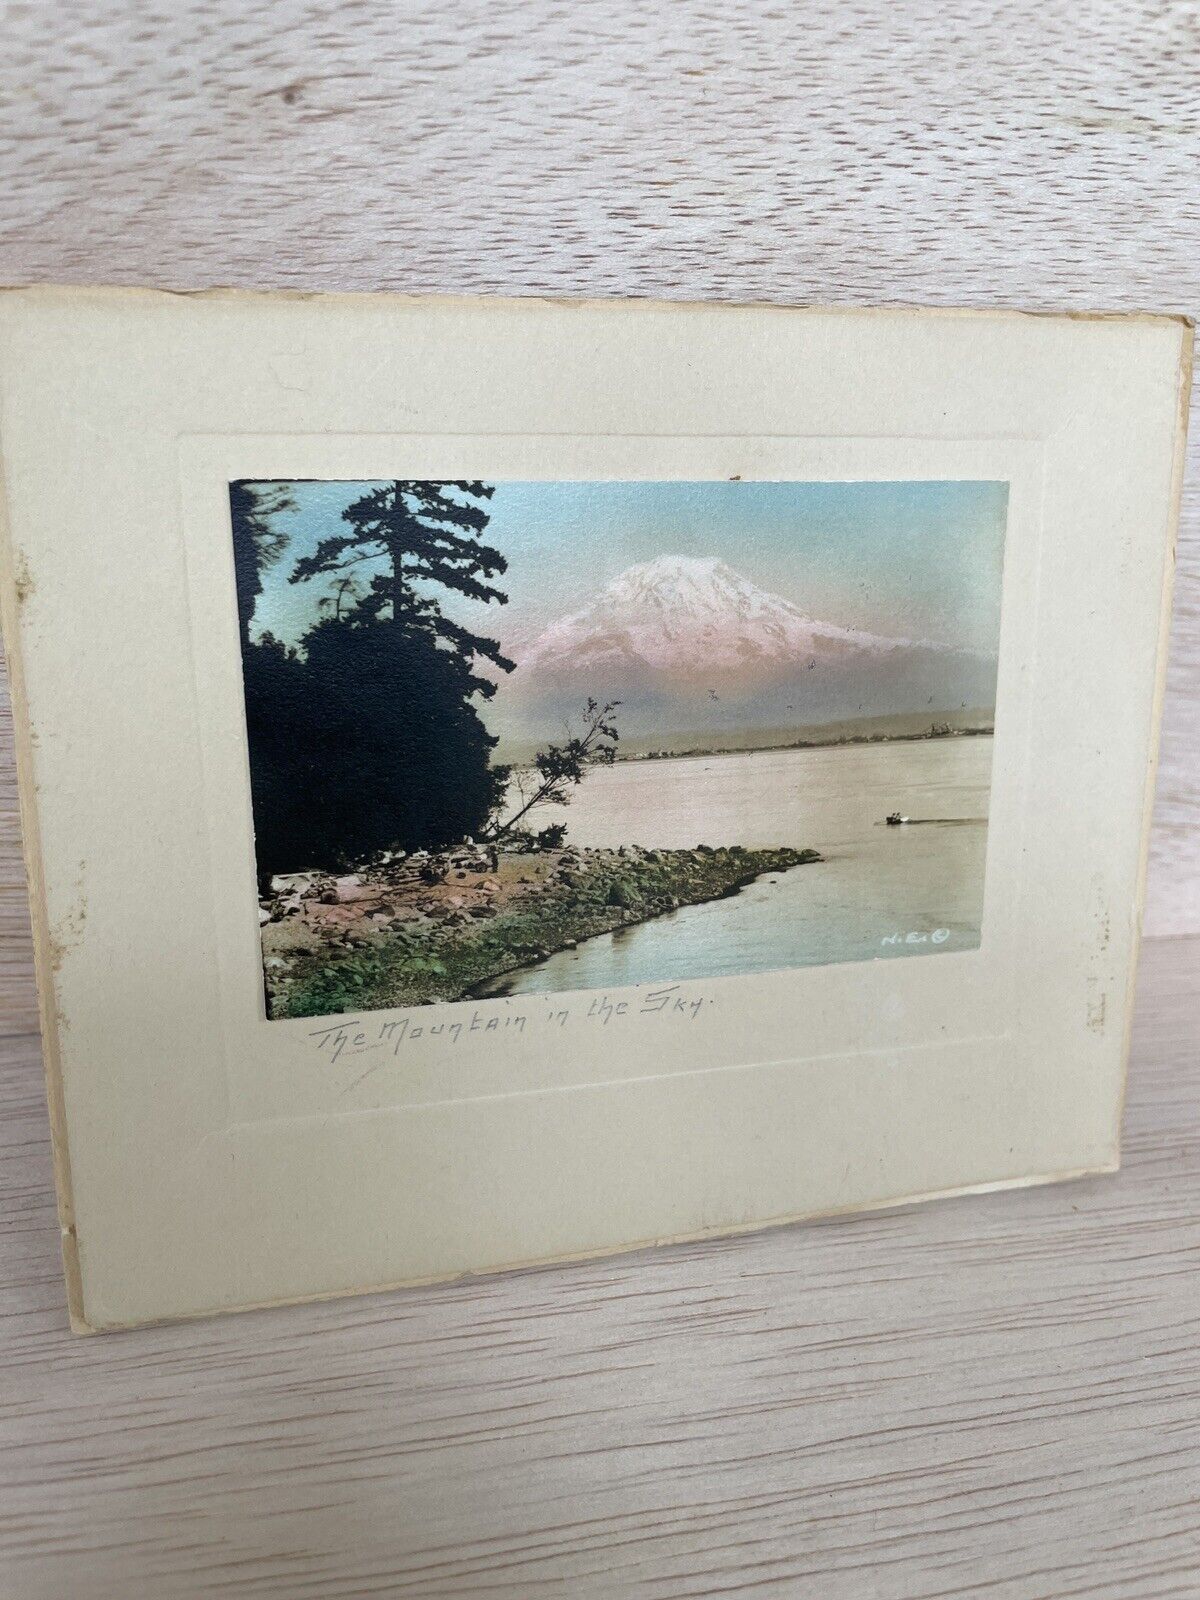 Norman Edson Hand Tinted Mt. Rainier Antique Photo “The Mountain In The Sky”